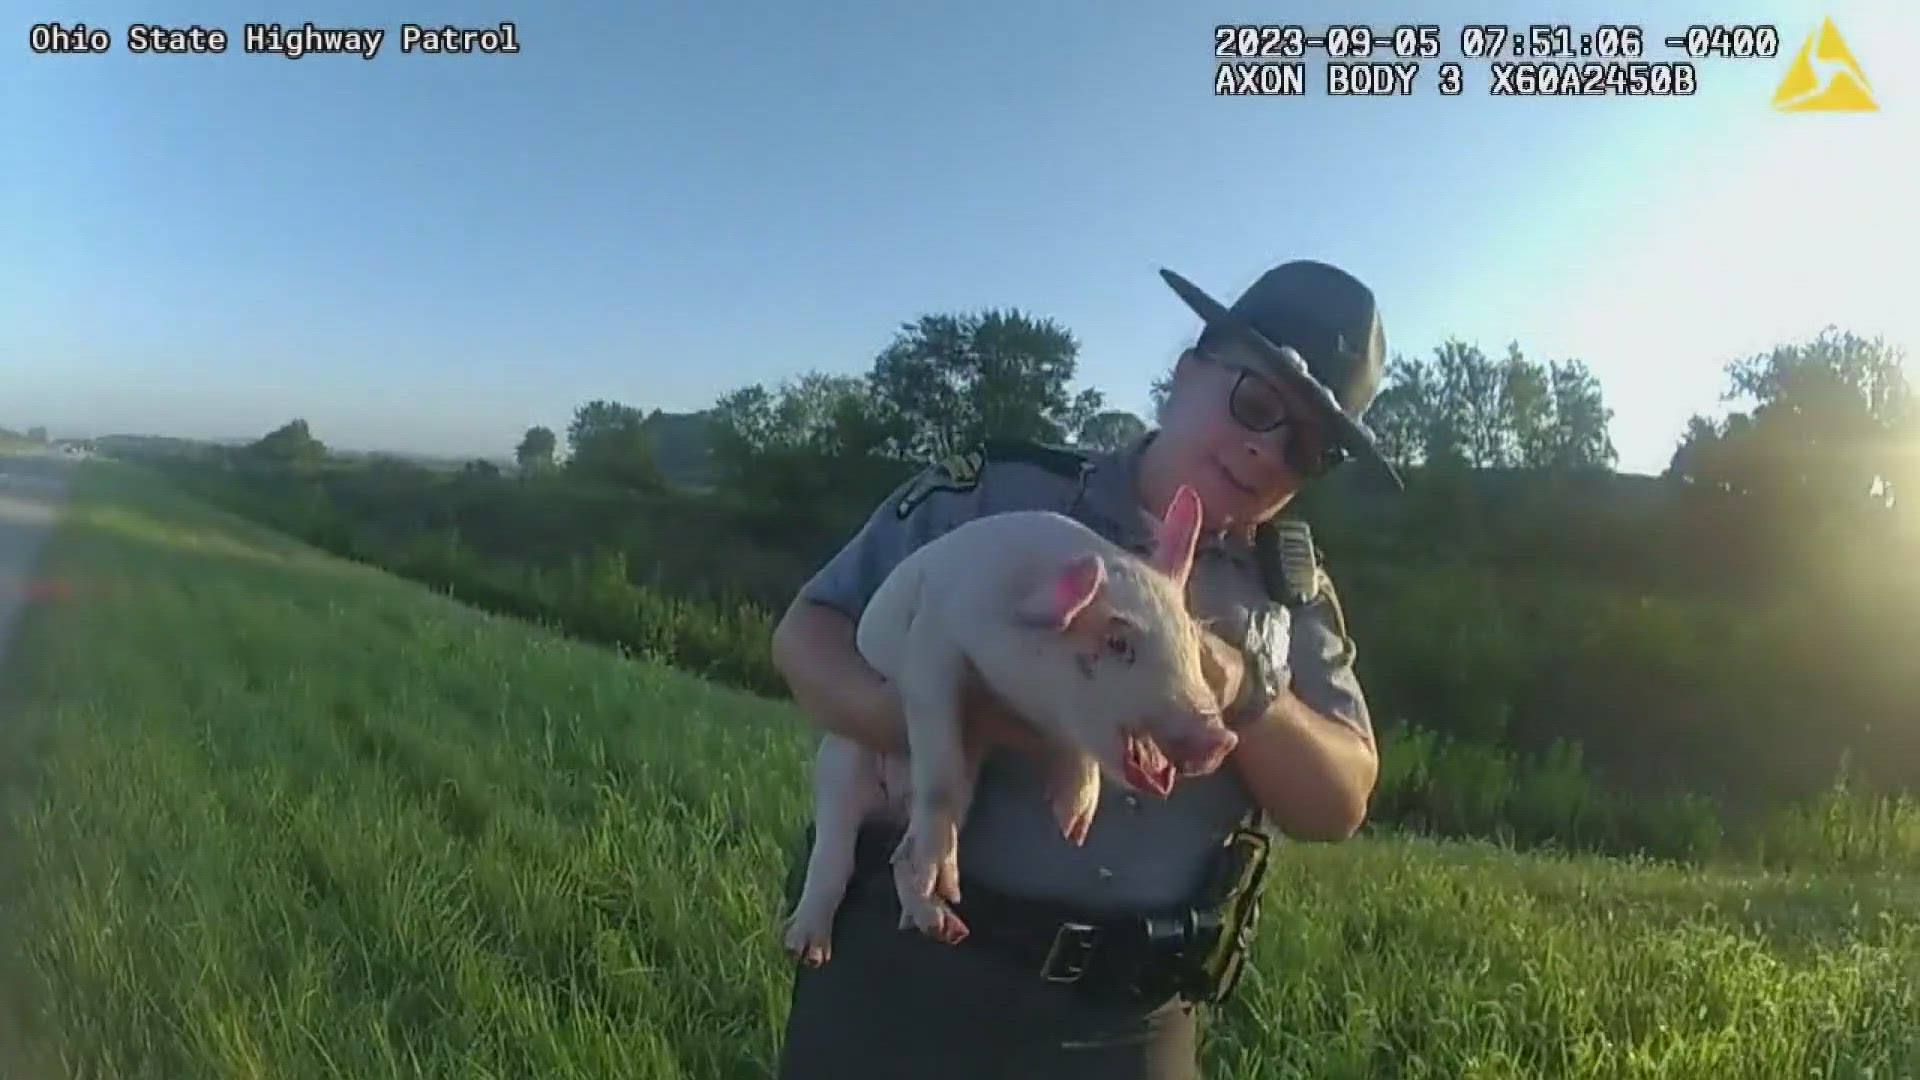 The Ross County Humane Society said the pig fell from someone's transport and ended up on the side of the road.